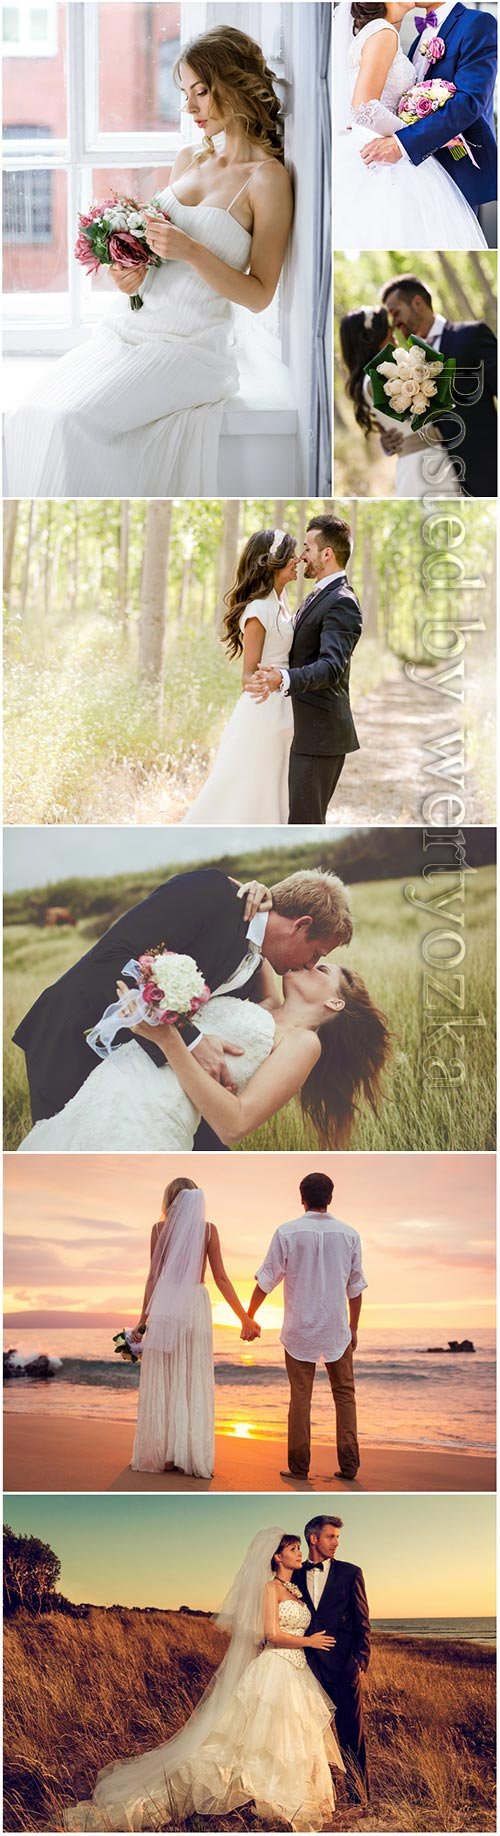 Wedding, couples in love, bride and groom stock photo